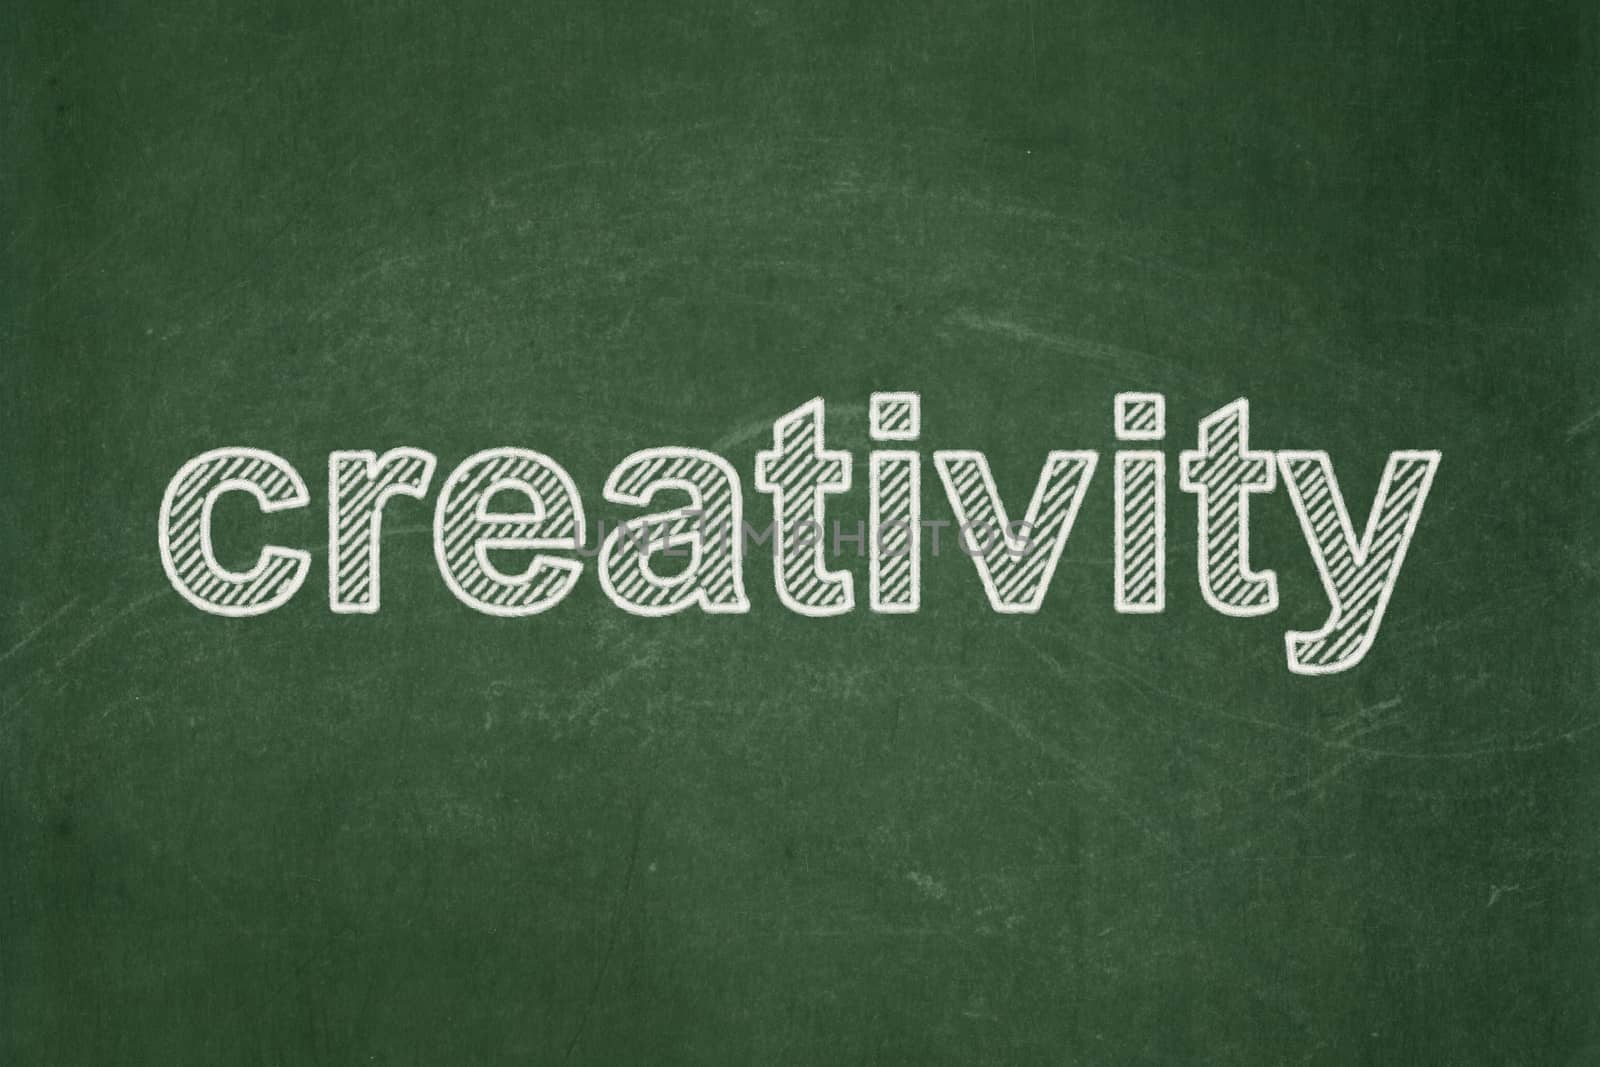 Advertising concept: text Creativity on Green chalkboard background